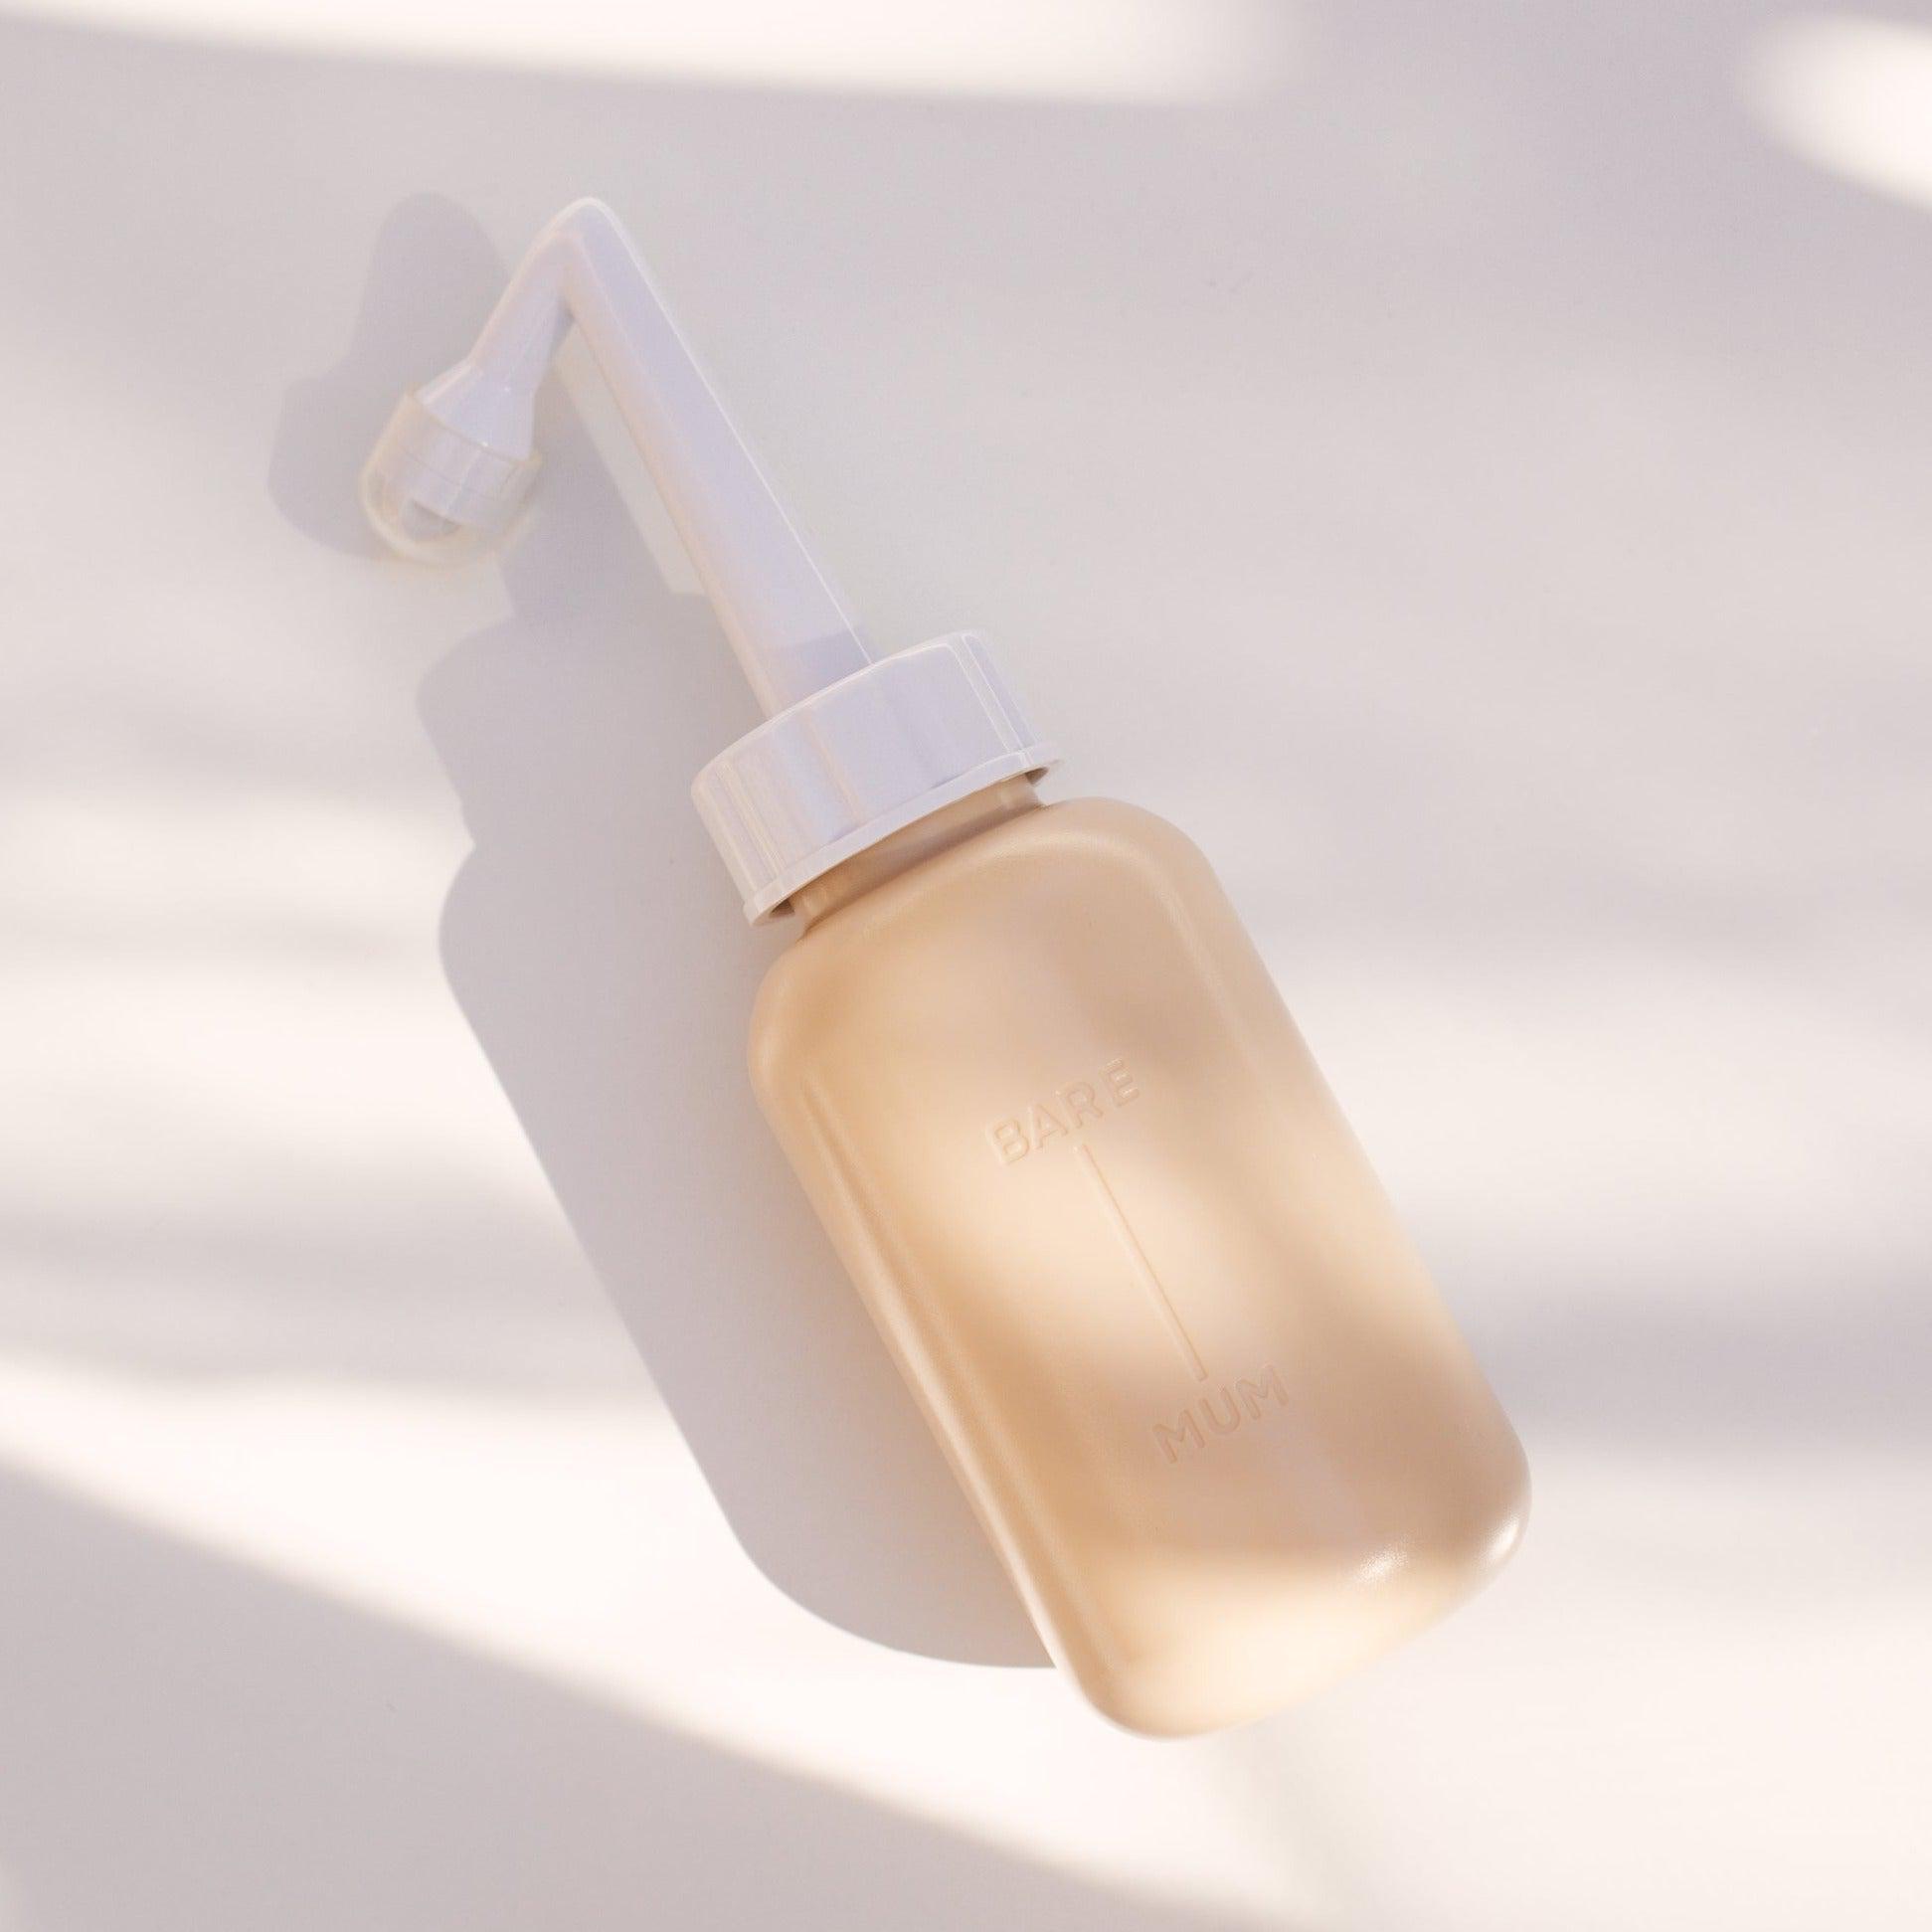 An easy to use, mess free, perineal wash bottle designed to relieve the sting of urine and gently cleanse sensitive areas.  Make your postpartum recovery more comfortable with our ergonomic wash bottle that gently and effectively cleanses your vulva, perineum, or site of a c-section, without pressure. 